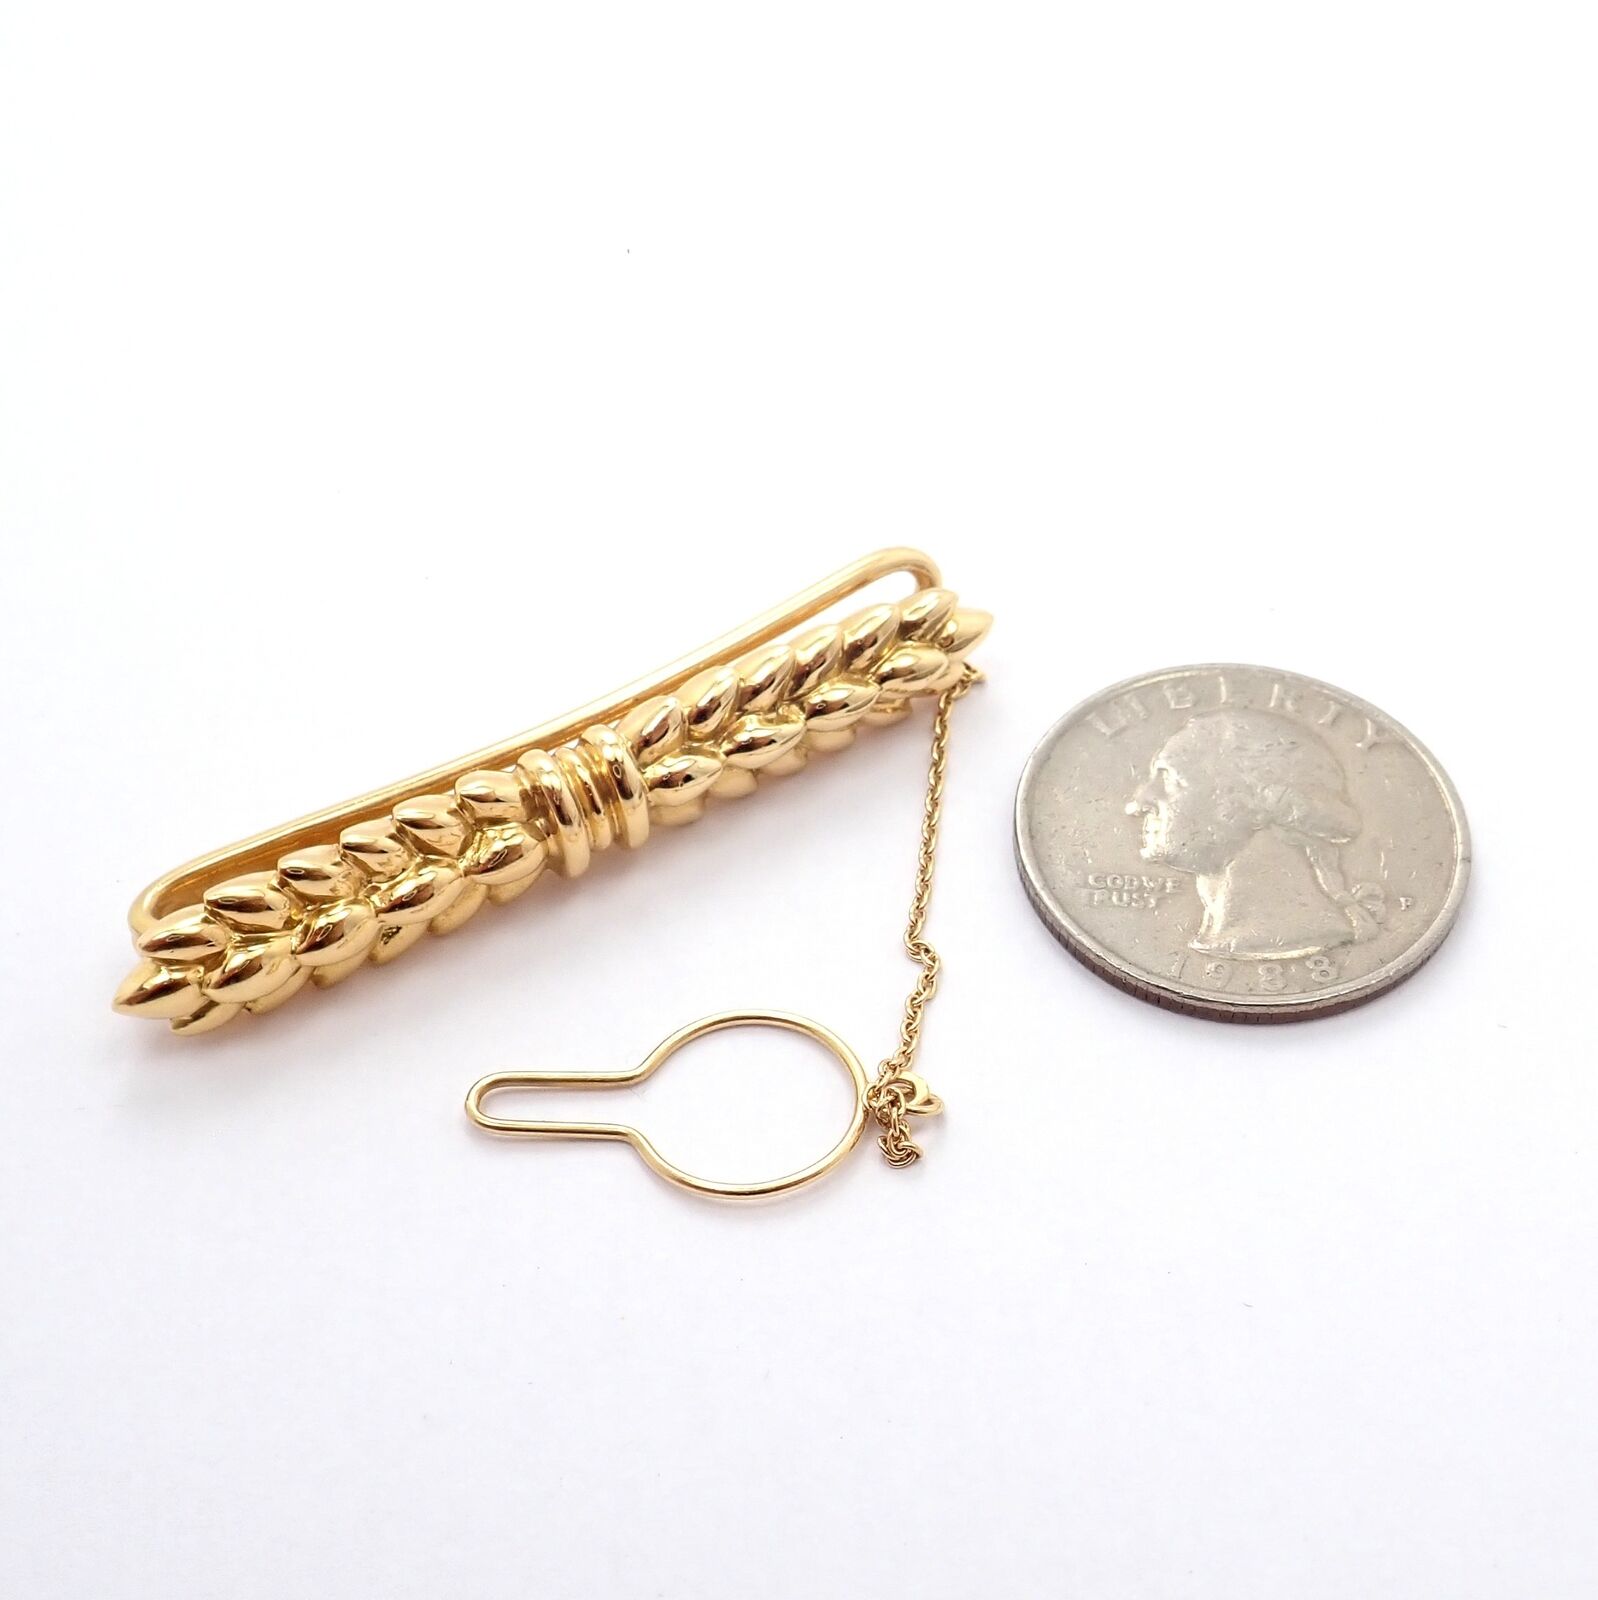 Hermes Jewelry & Watches:Men's Jewelry:Tie Clasps & Tacks Authentic! Rare Hermes 18k Yellow Gold Vintage Tie Bar Clip